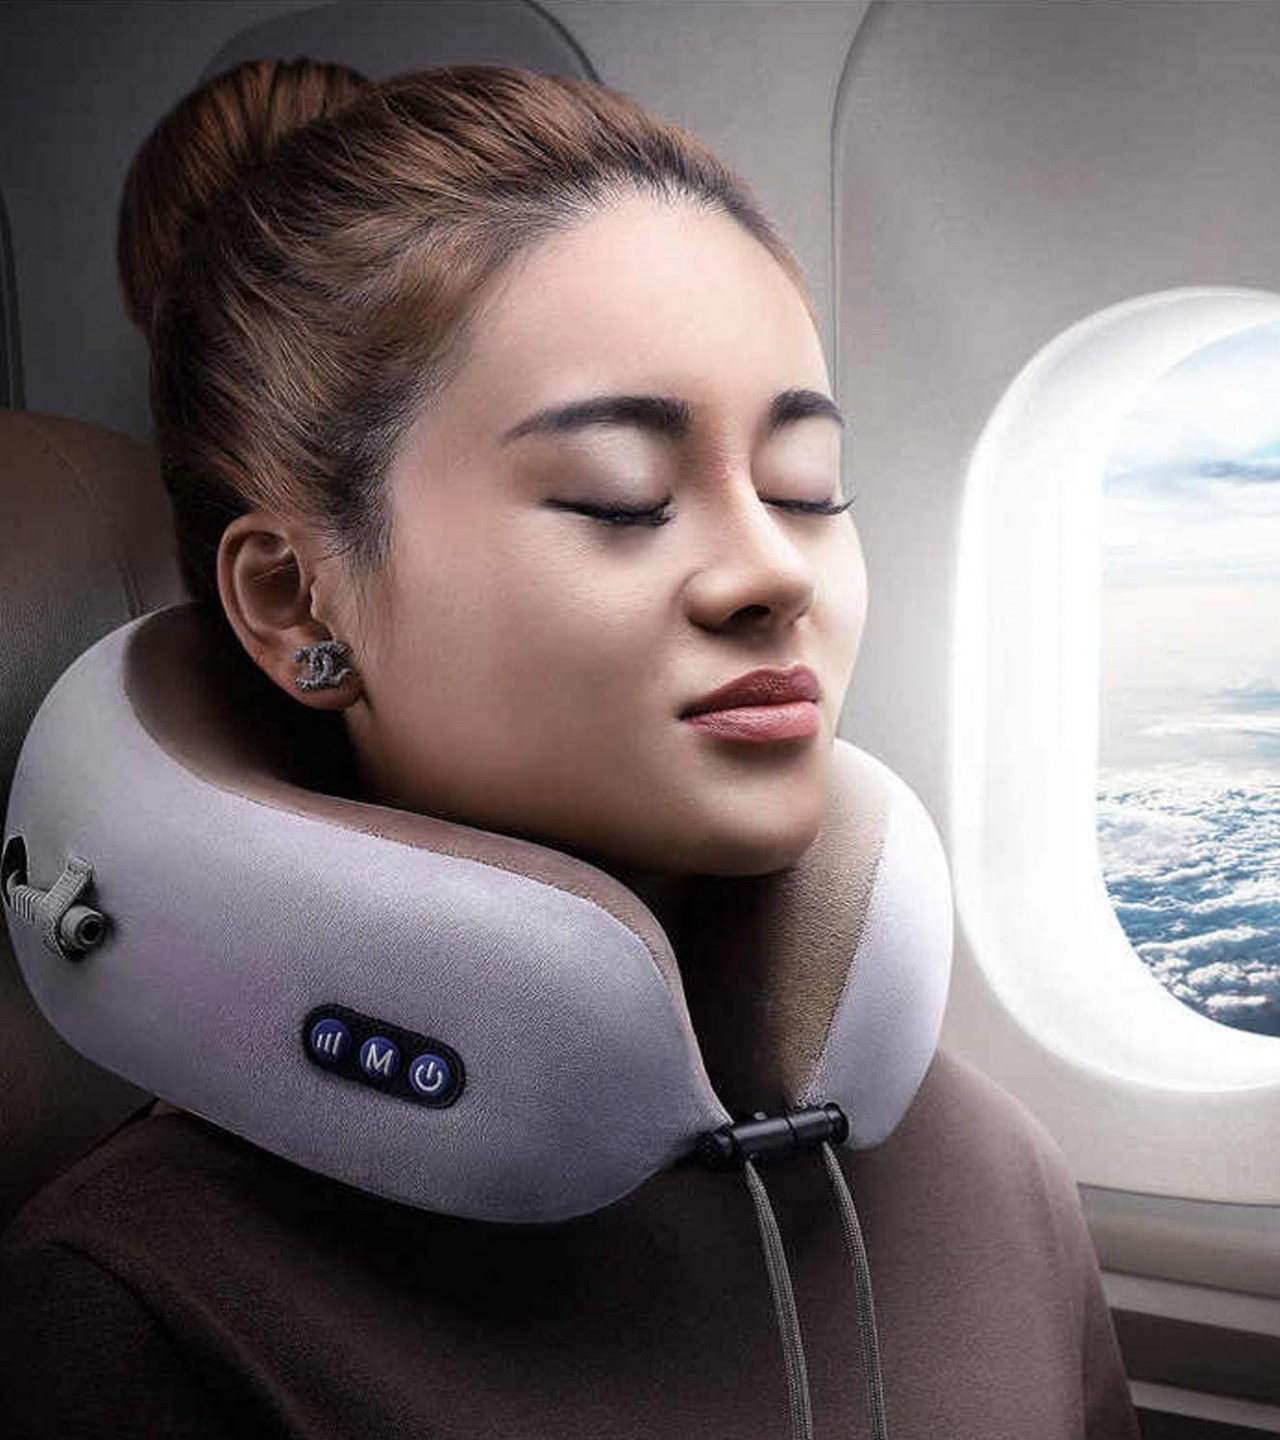 Neck Massager U-shaped Massage Pillow Supporting Head And Neck Electric Kneading Massage